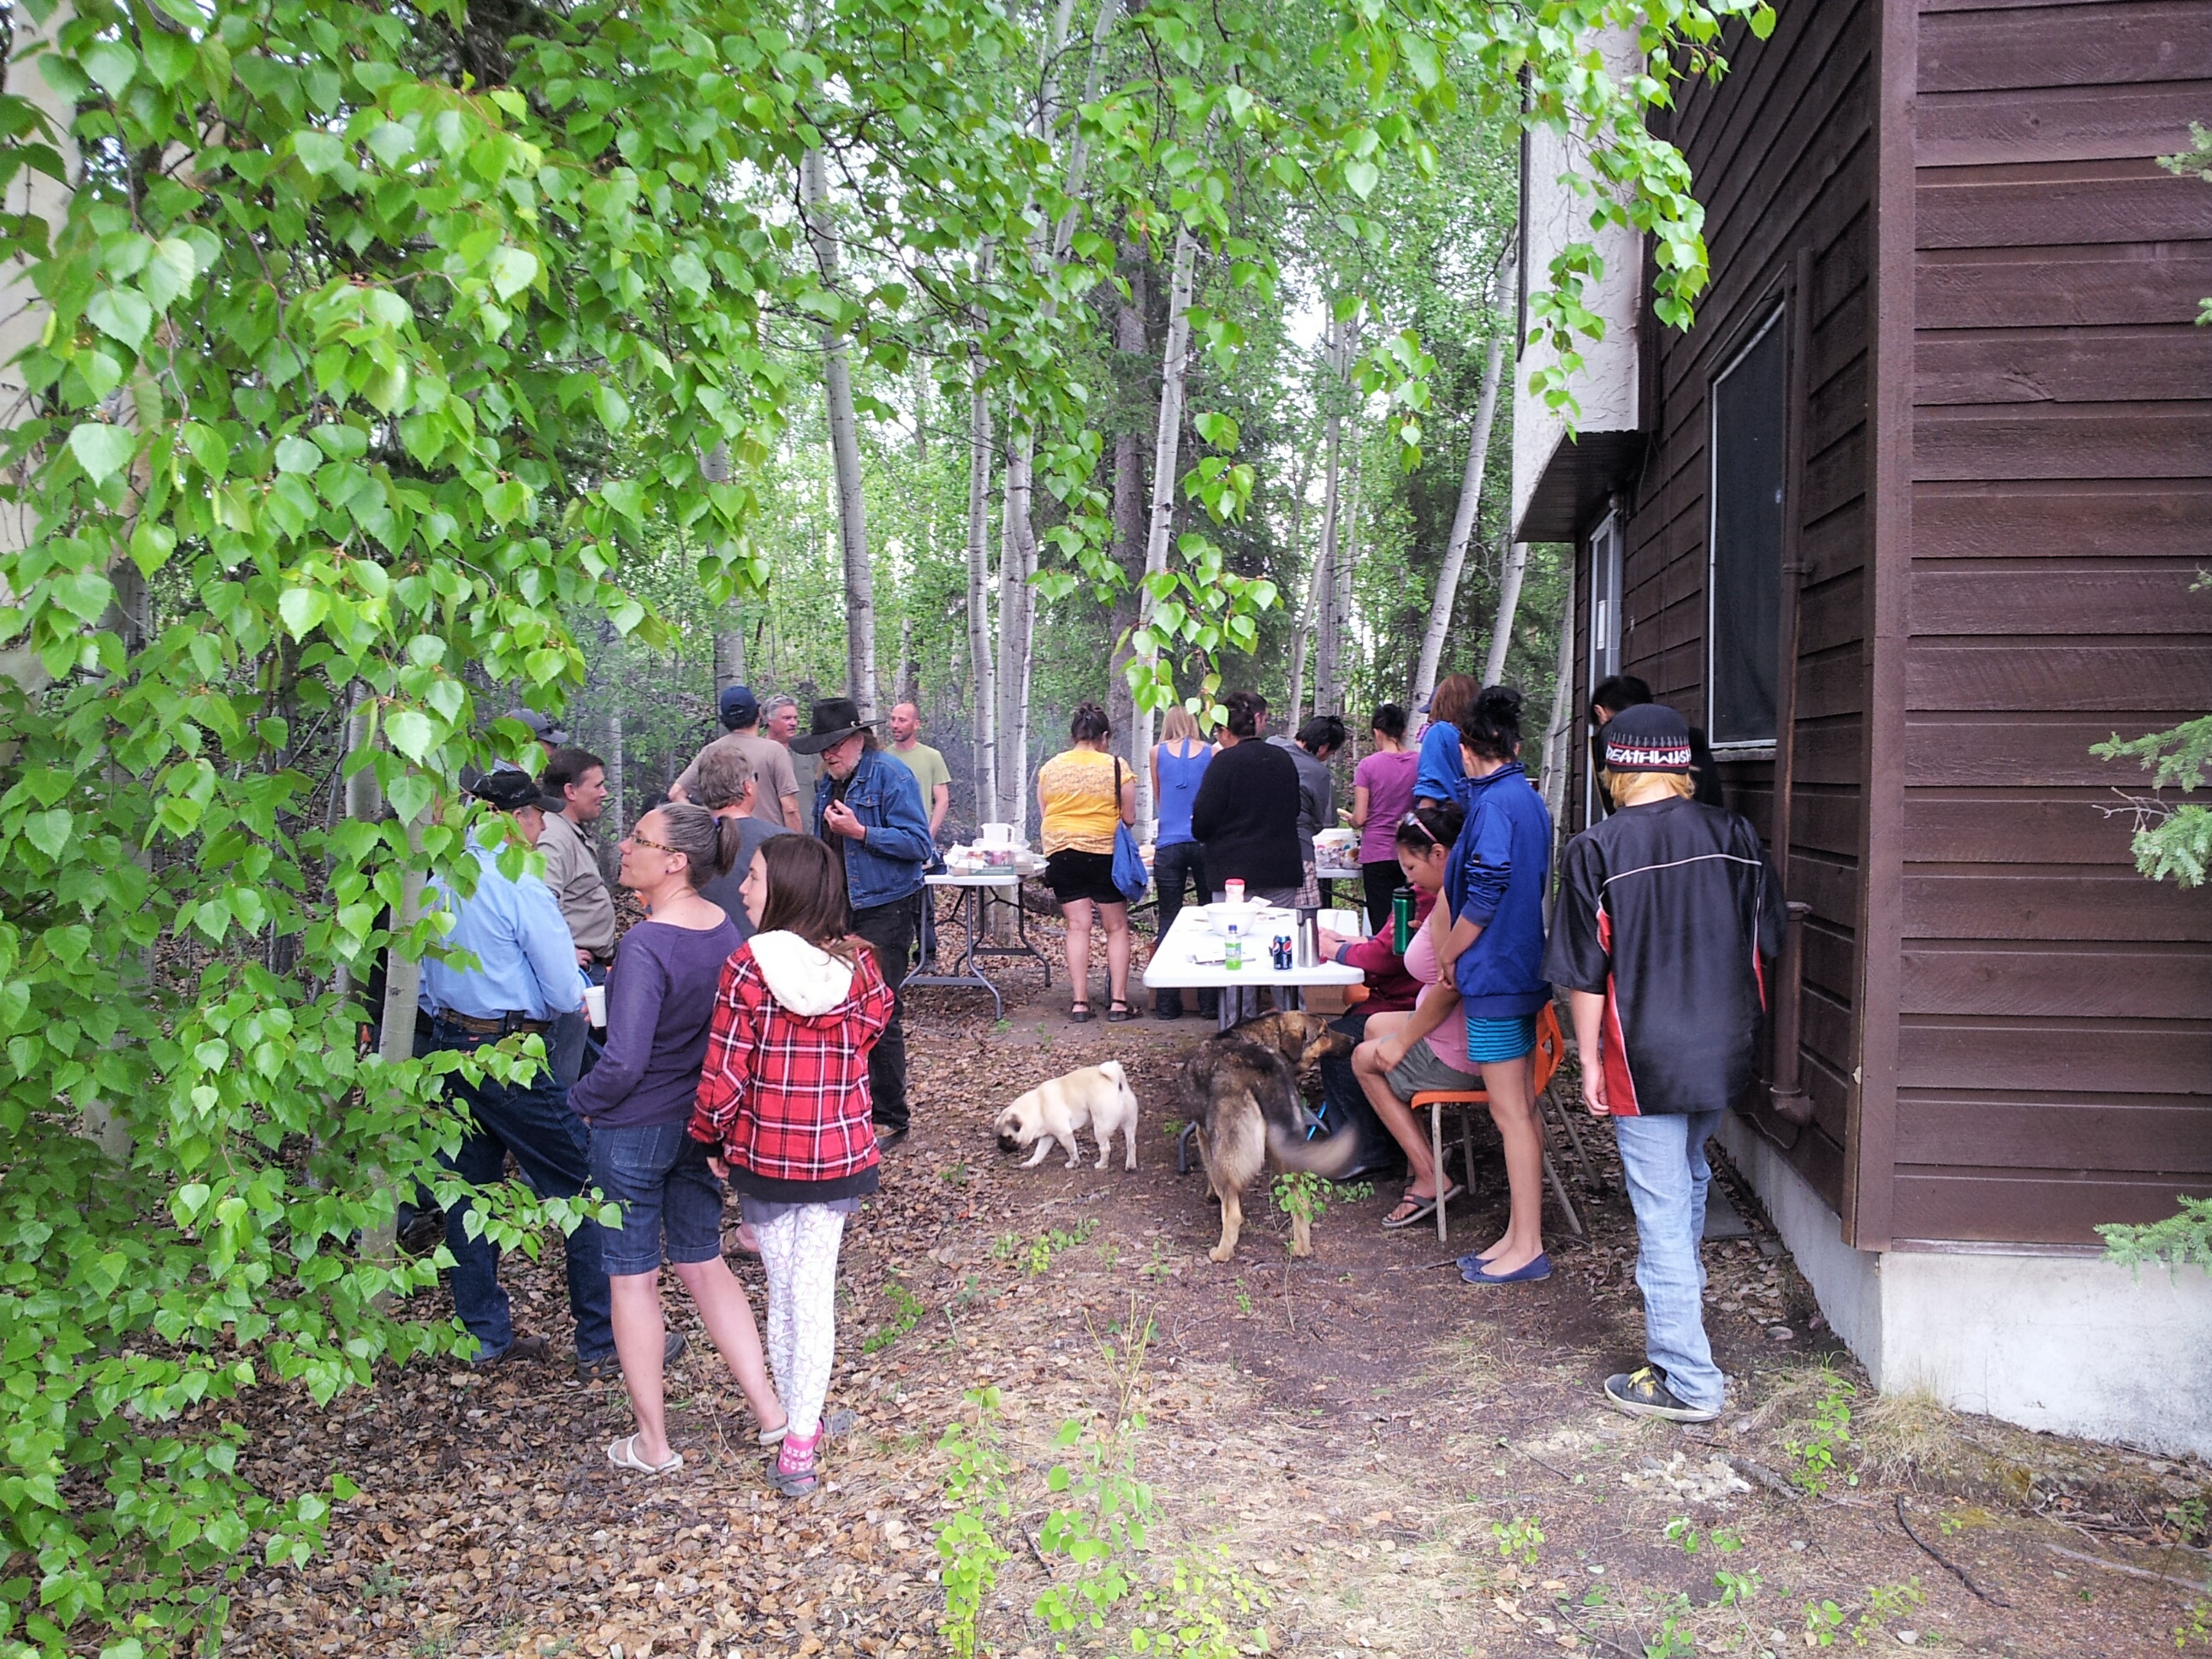 People stand in line during the summer under trees waiting for a bbq meal